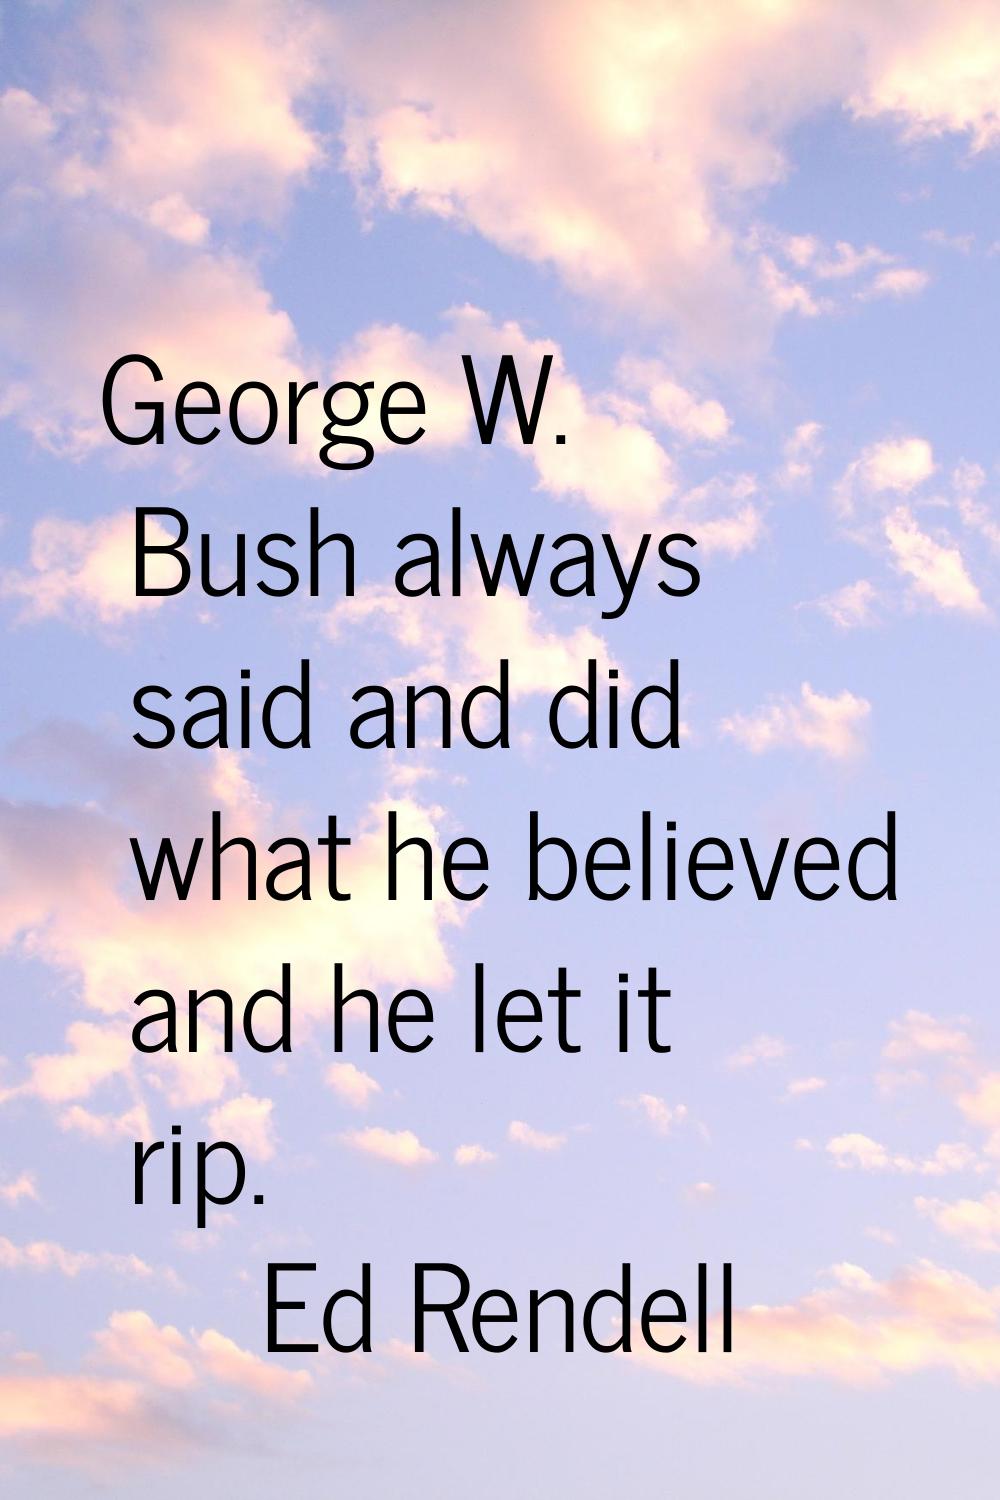 George W. Bush always said and did what he believed and he let it rip.